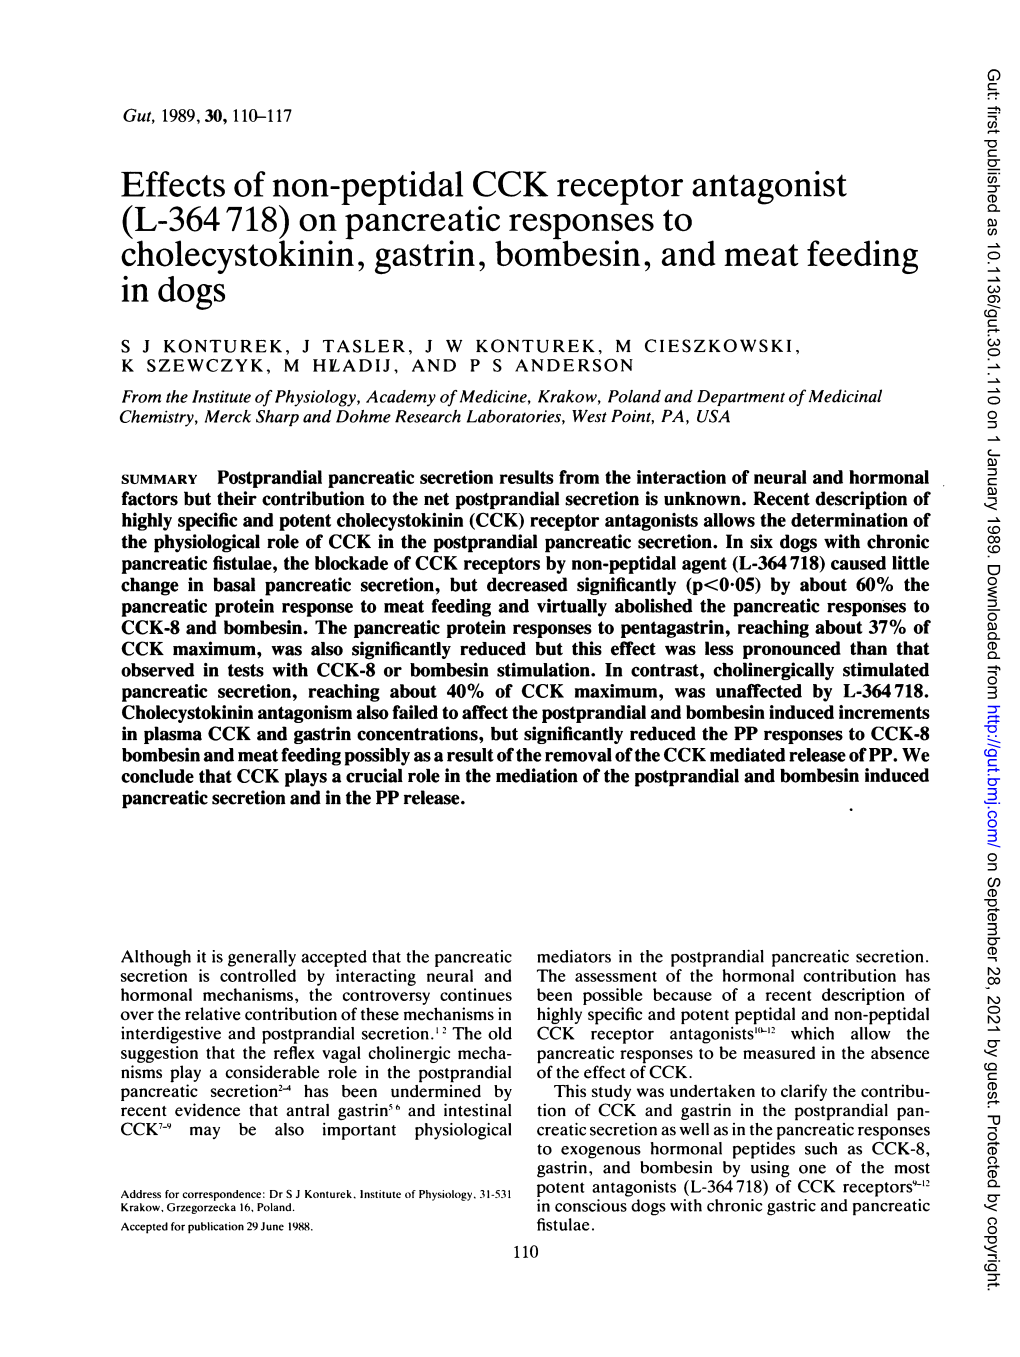 Effects of Non-Peptidal CCK Receptor Antagonist Cholecystokinin, Gastrin, Bombesin, and Meat Feeding in Dogs